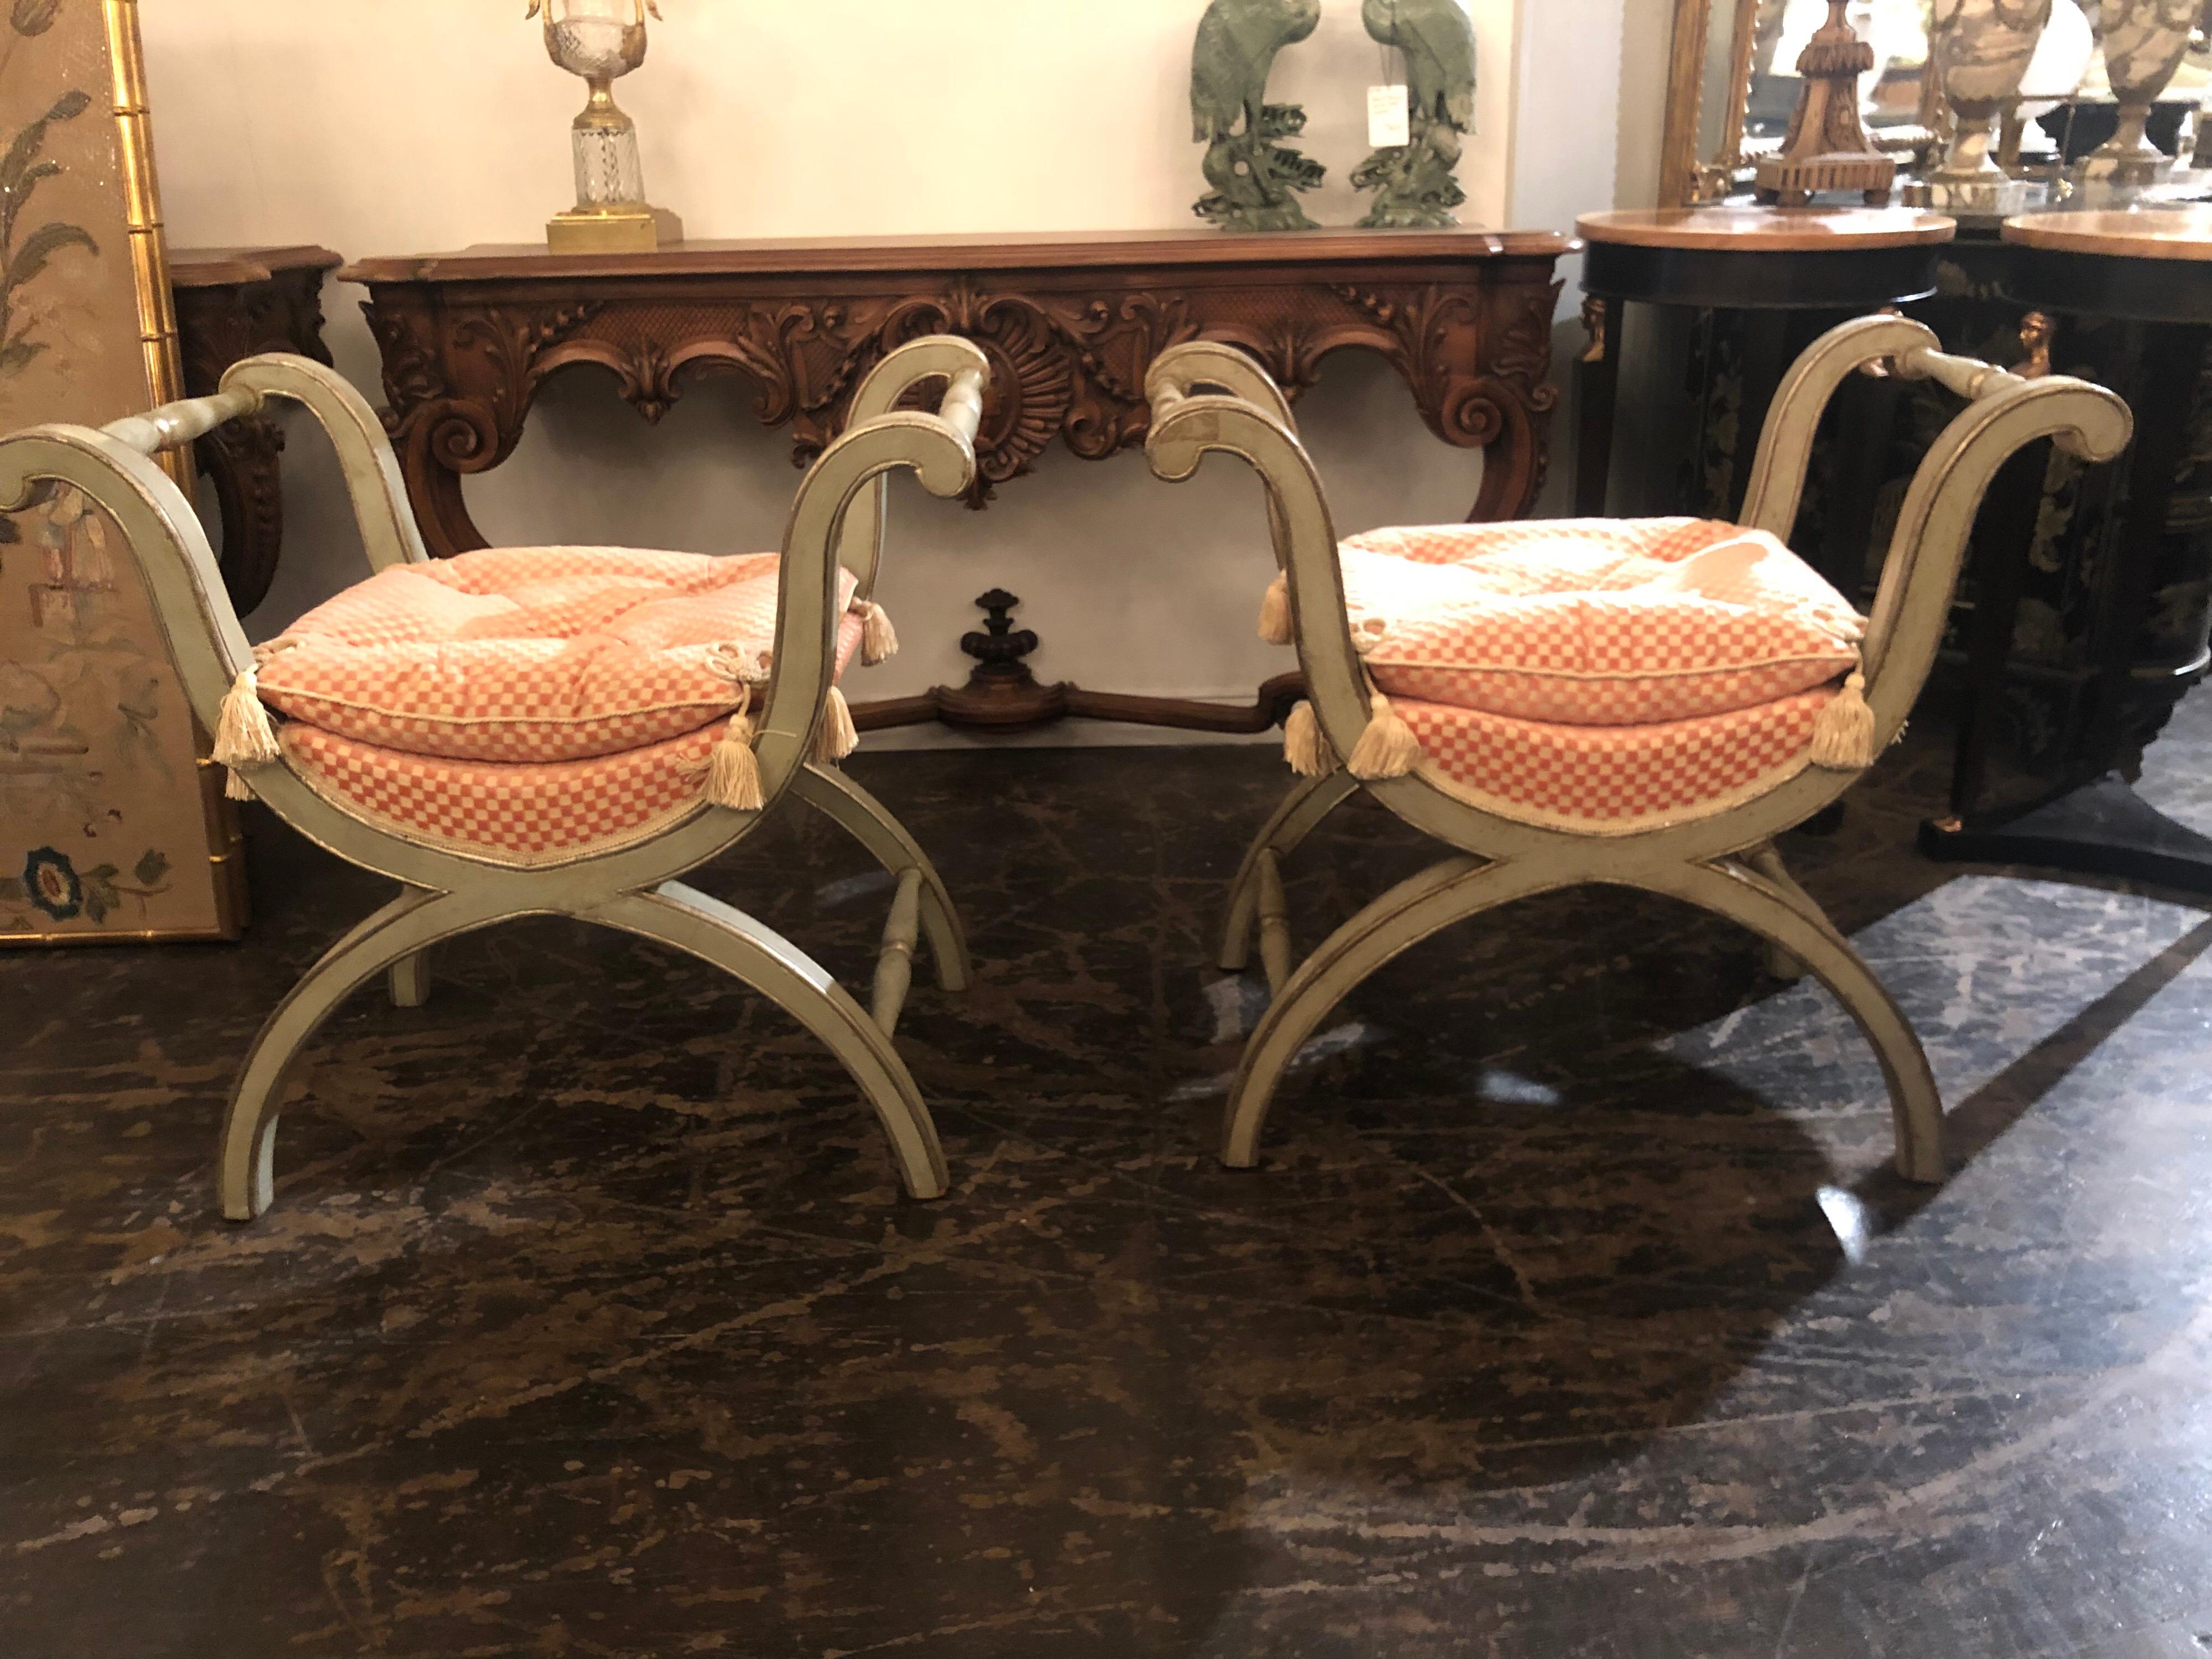 Very nice pair of X Form Benches painted in a nice silver grey patina with gold highlights.
Lovely upholstered cushions in a crème and peach colored fabric.